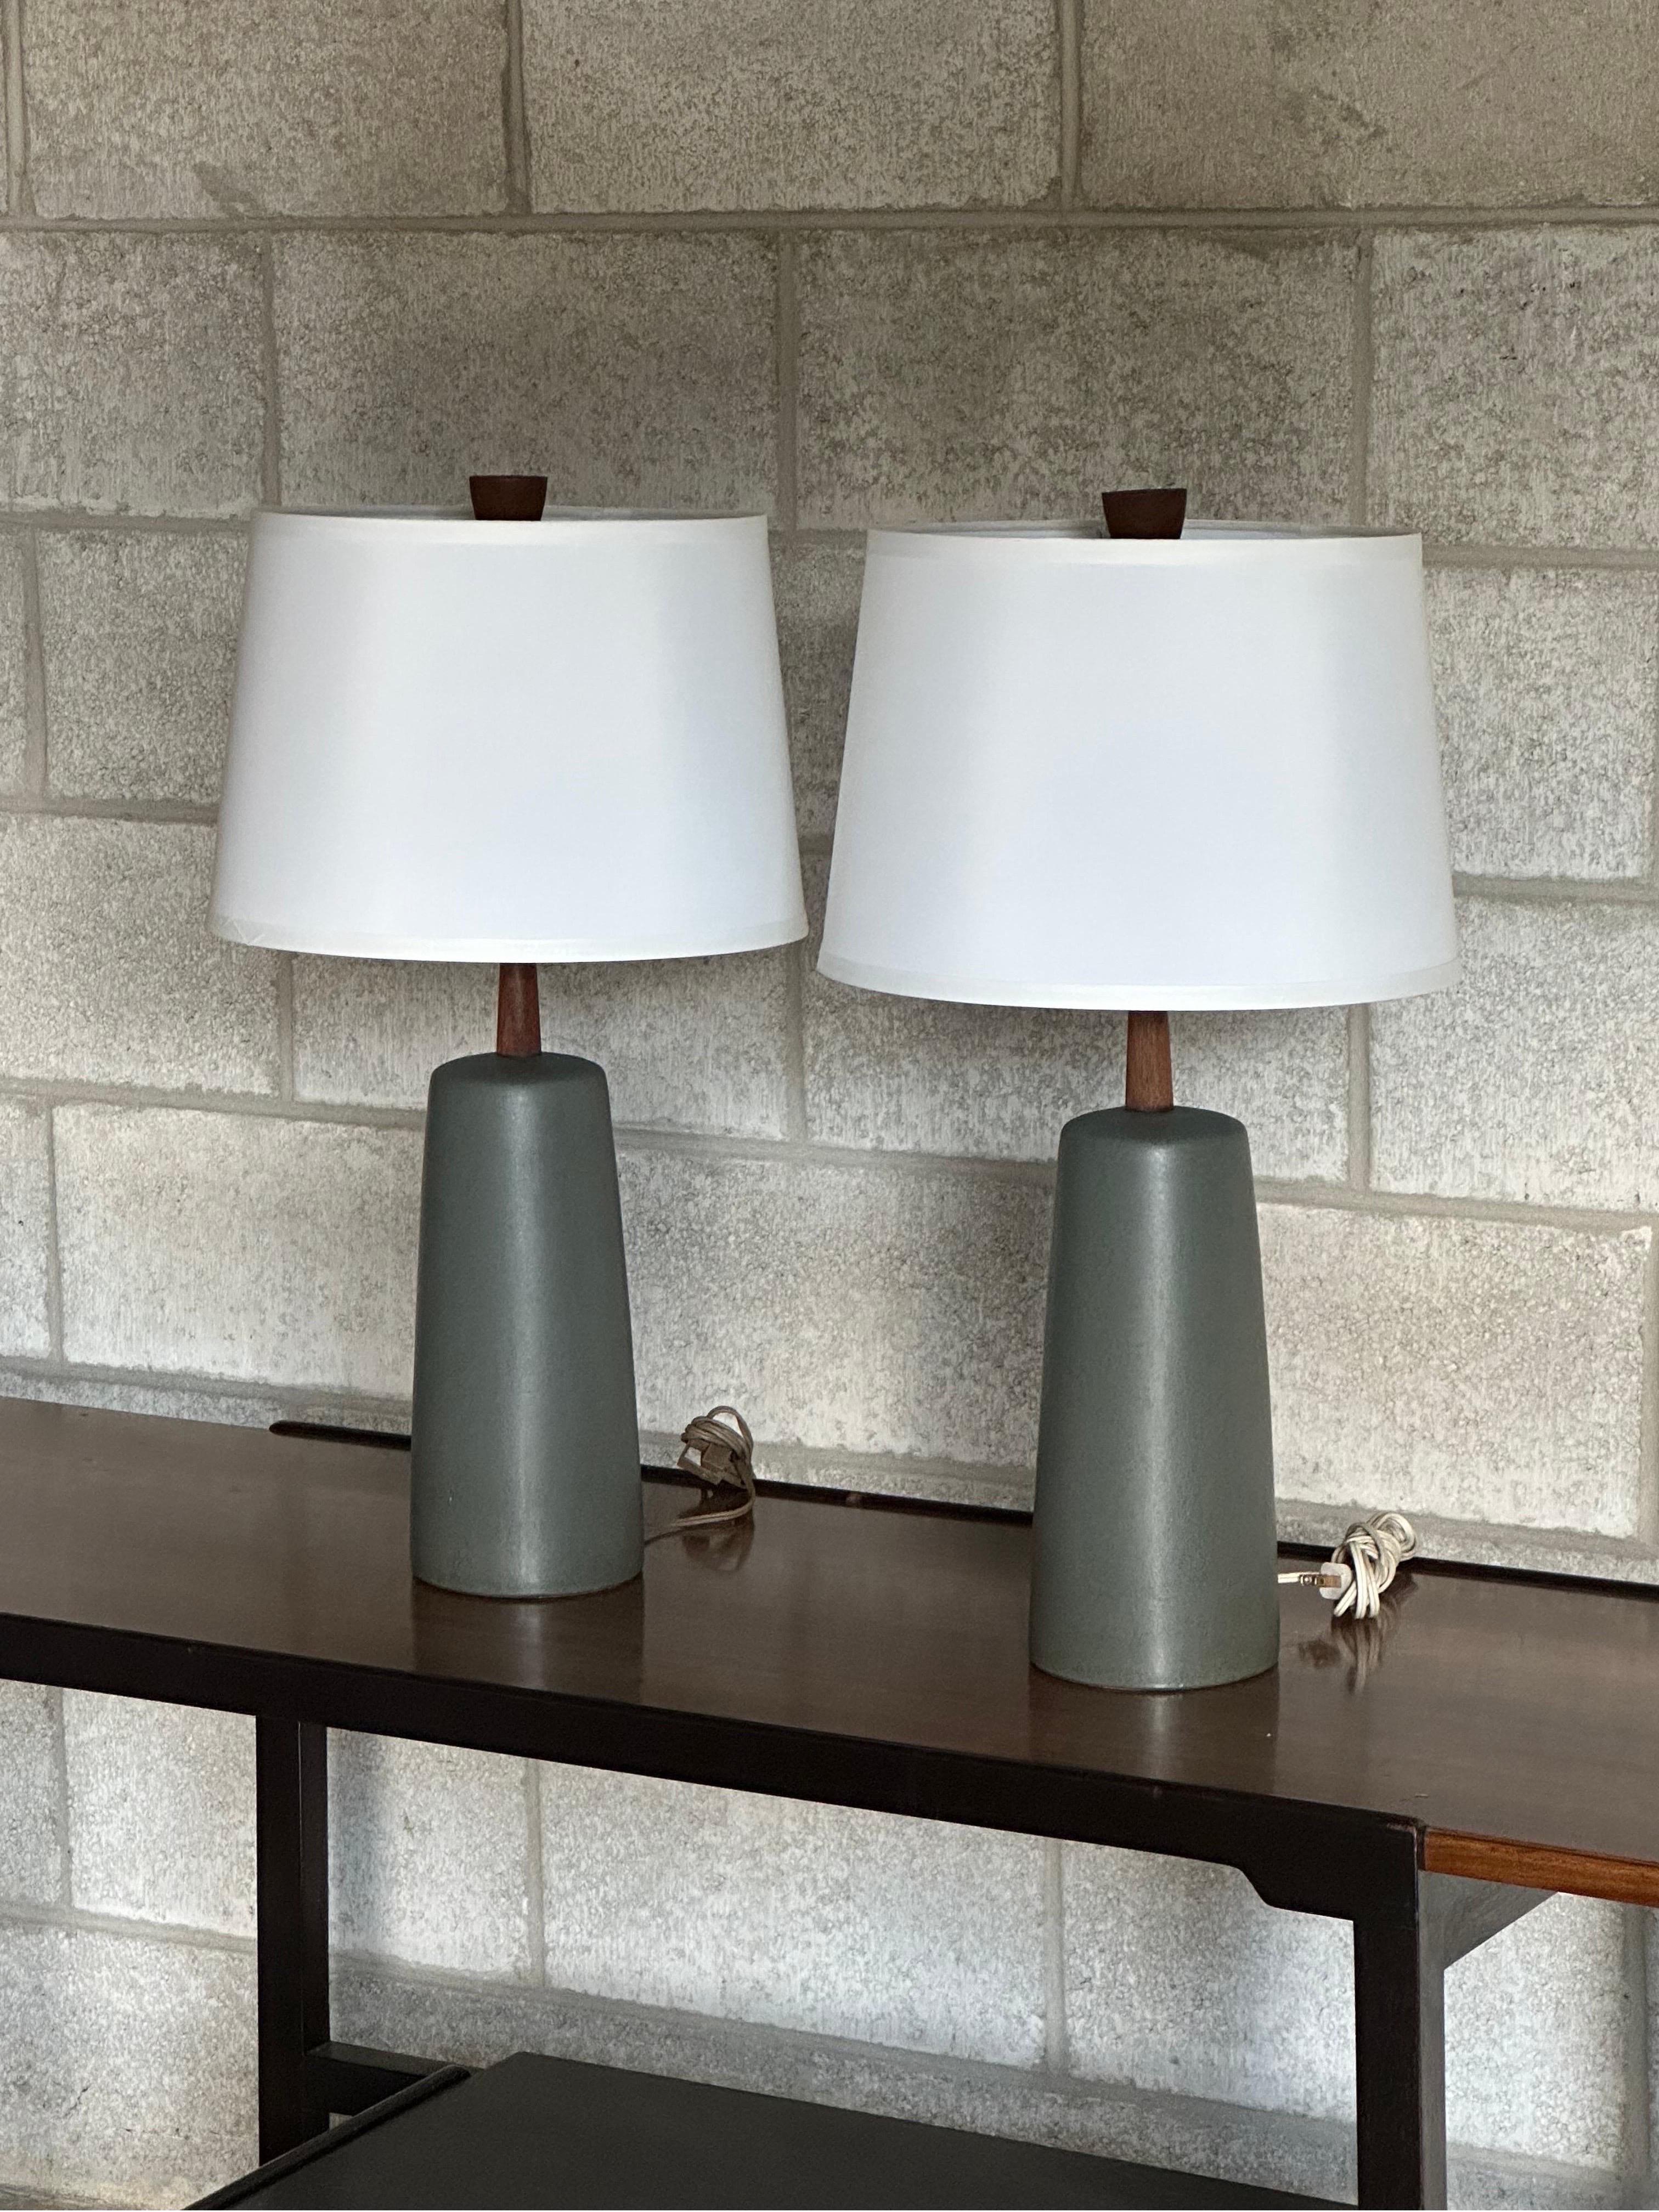 A pair of table lamps by famed ceramicist duo Jane and Gordon Martz for Marshall Studios. Featuring a wonderful turquoise body with walnut neck and finial.

Dimensions-
Overall
24” tall
13” wide

Ceramic only 
12” tall
5” wide 